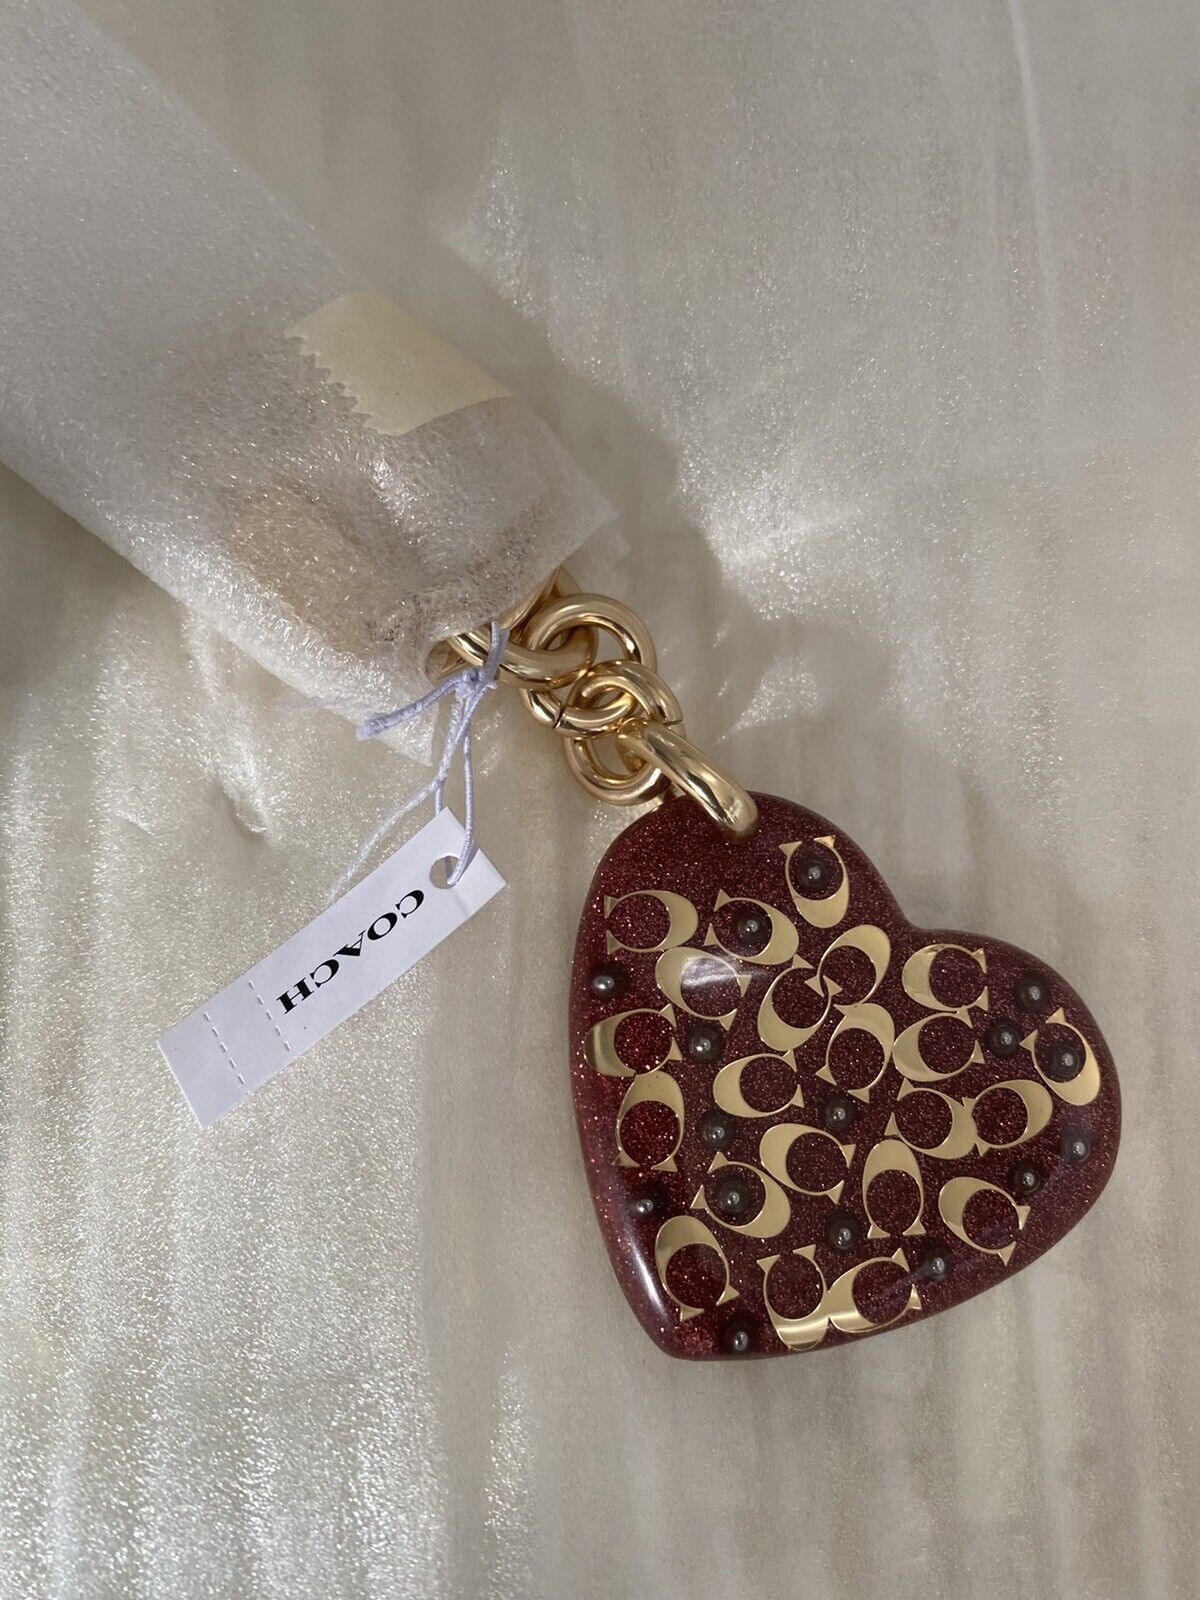 Coach Valentine's Day Signature Heart Bag Charm Resin and metal Gold C7749  | eBay